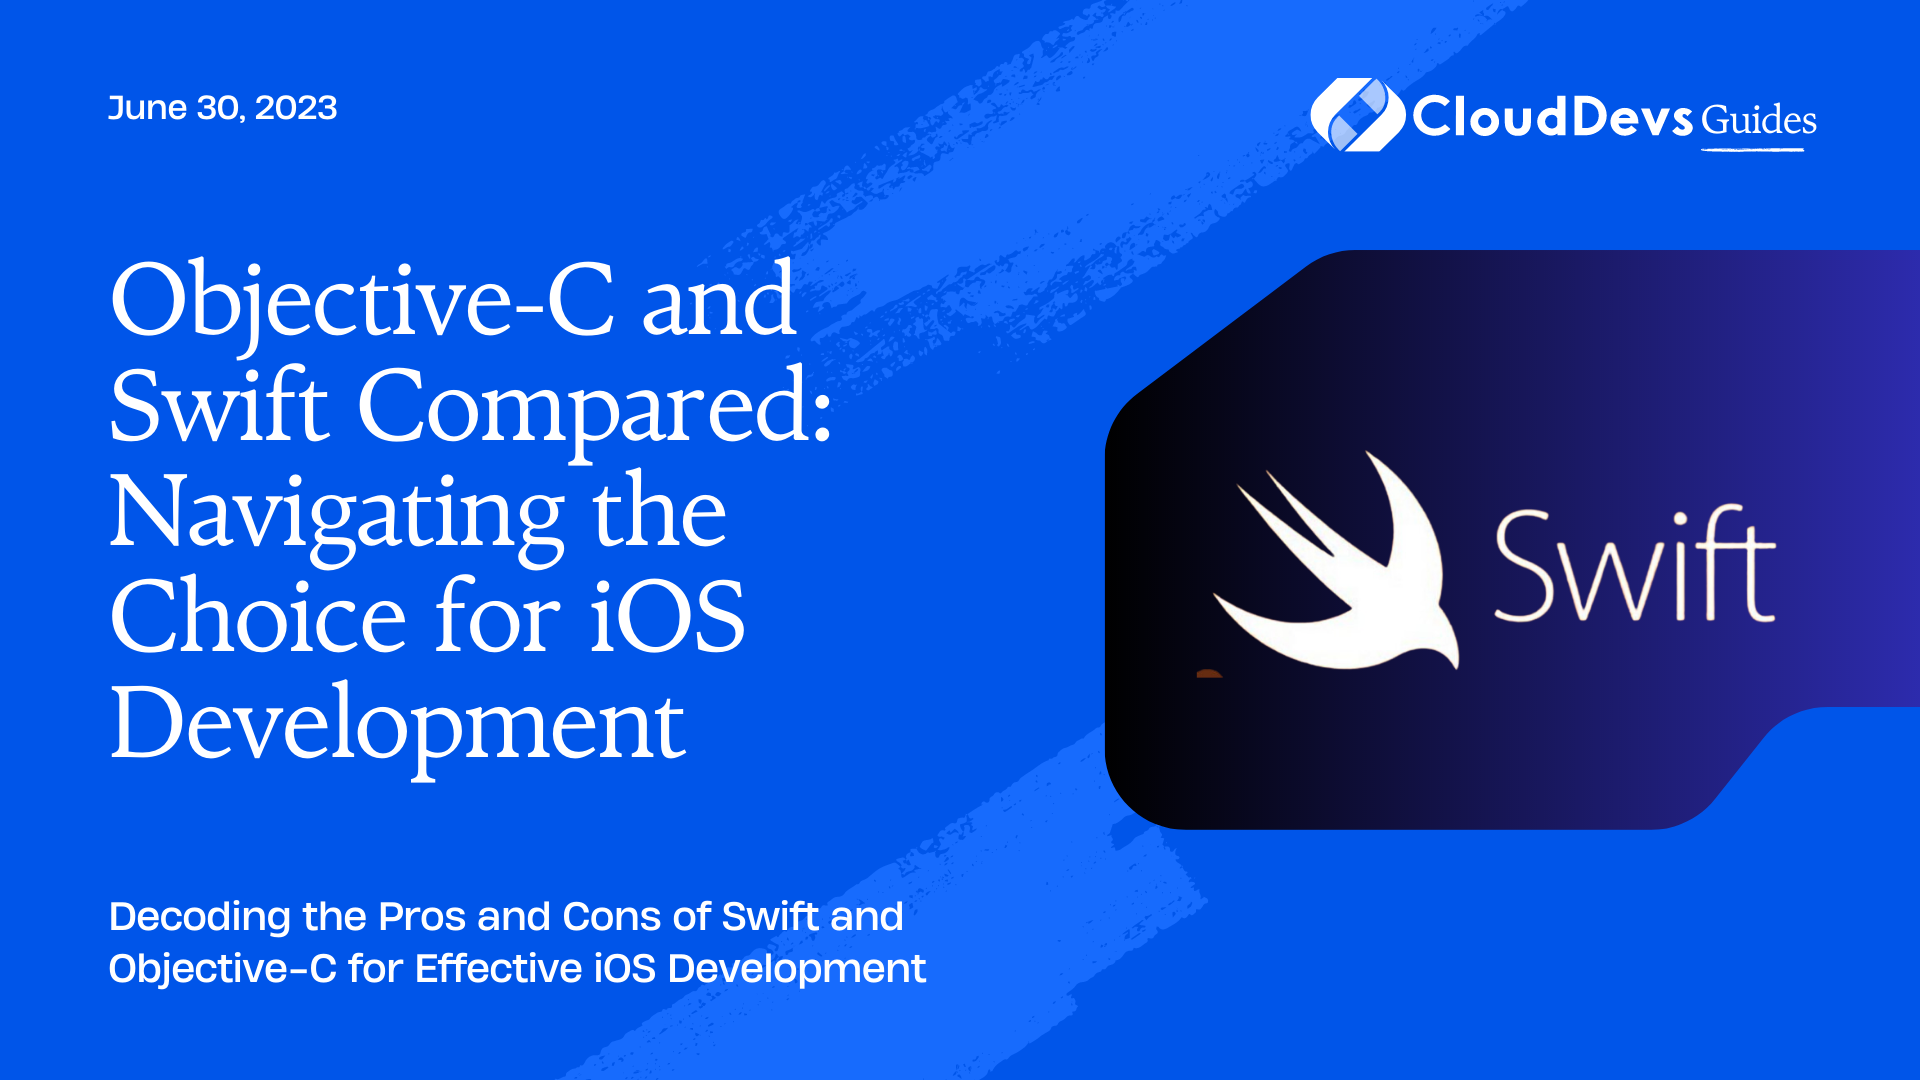 Objective-C and Swift Compared: Navigating the Choice for iOS Development